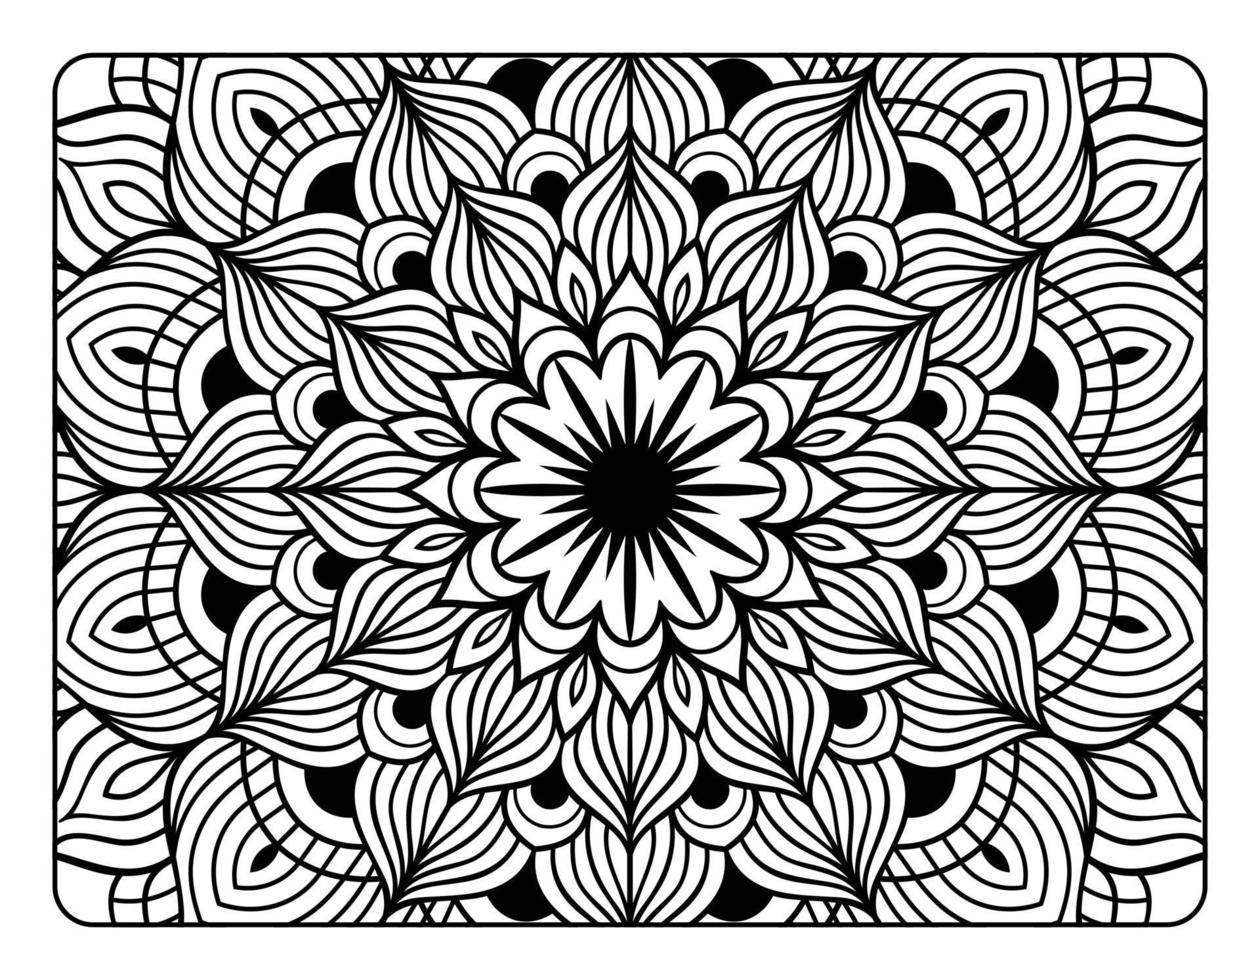 Mandala floral coloring page for adult coloring book, black and white mandala coloring page, hand drawn outlined doodle line art for adult coloring page interior vector